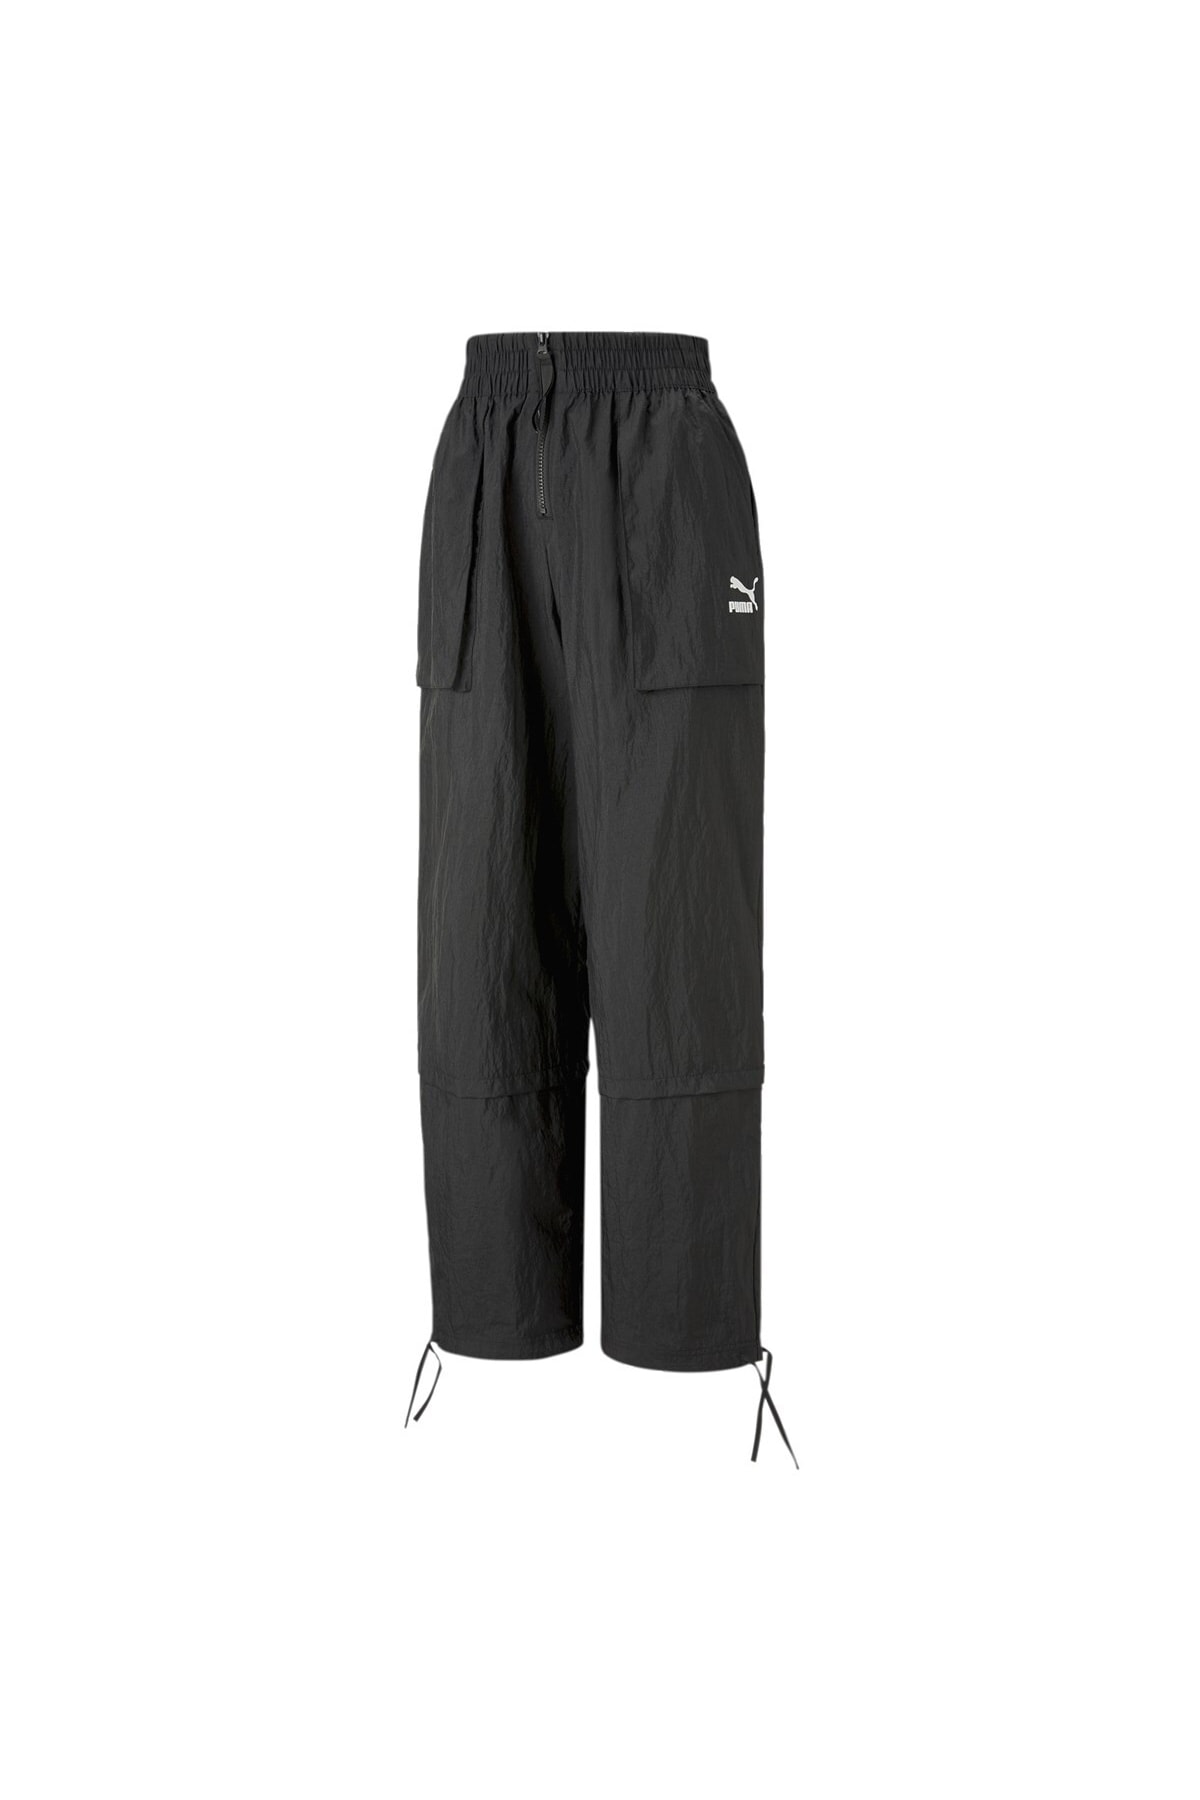 Puma Dare To High Rise Woven Pants